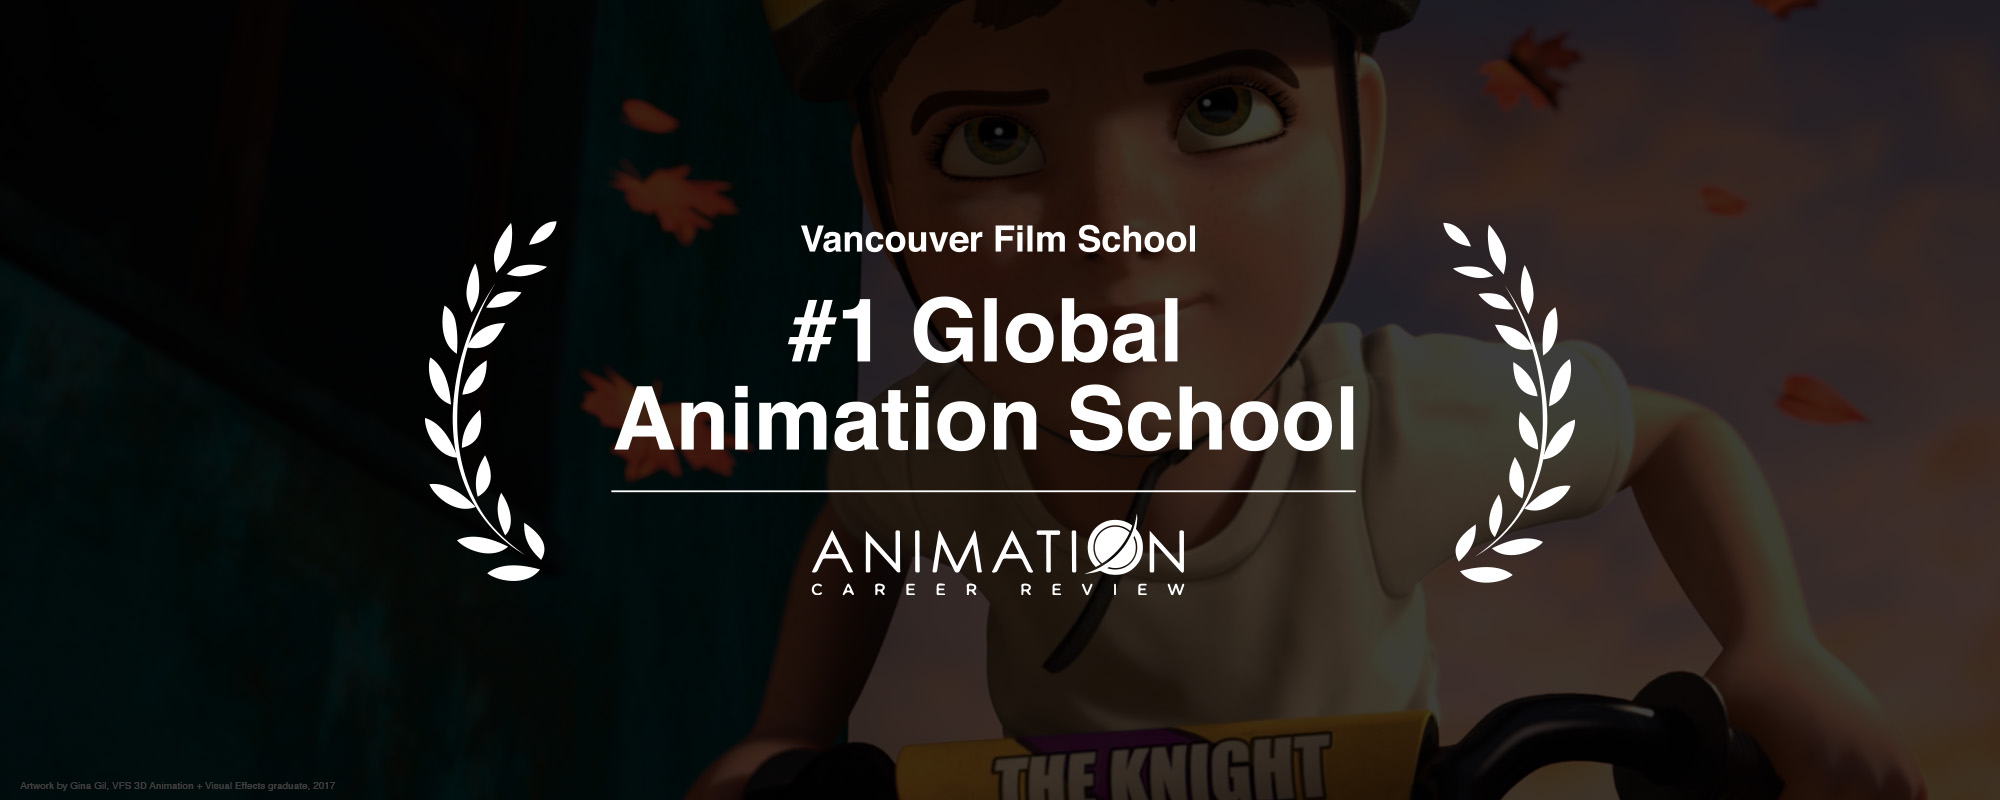 Vancouver Film School 3D Animation & Visual Effects program named #1 in the  world for 2020 | Vancouver Film School